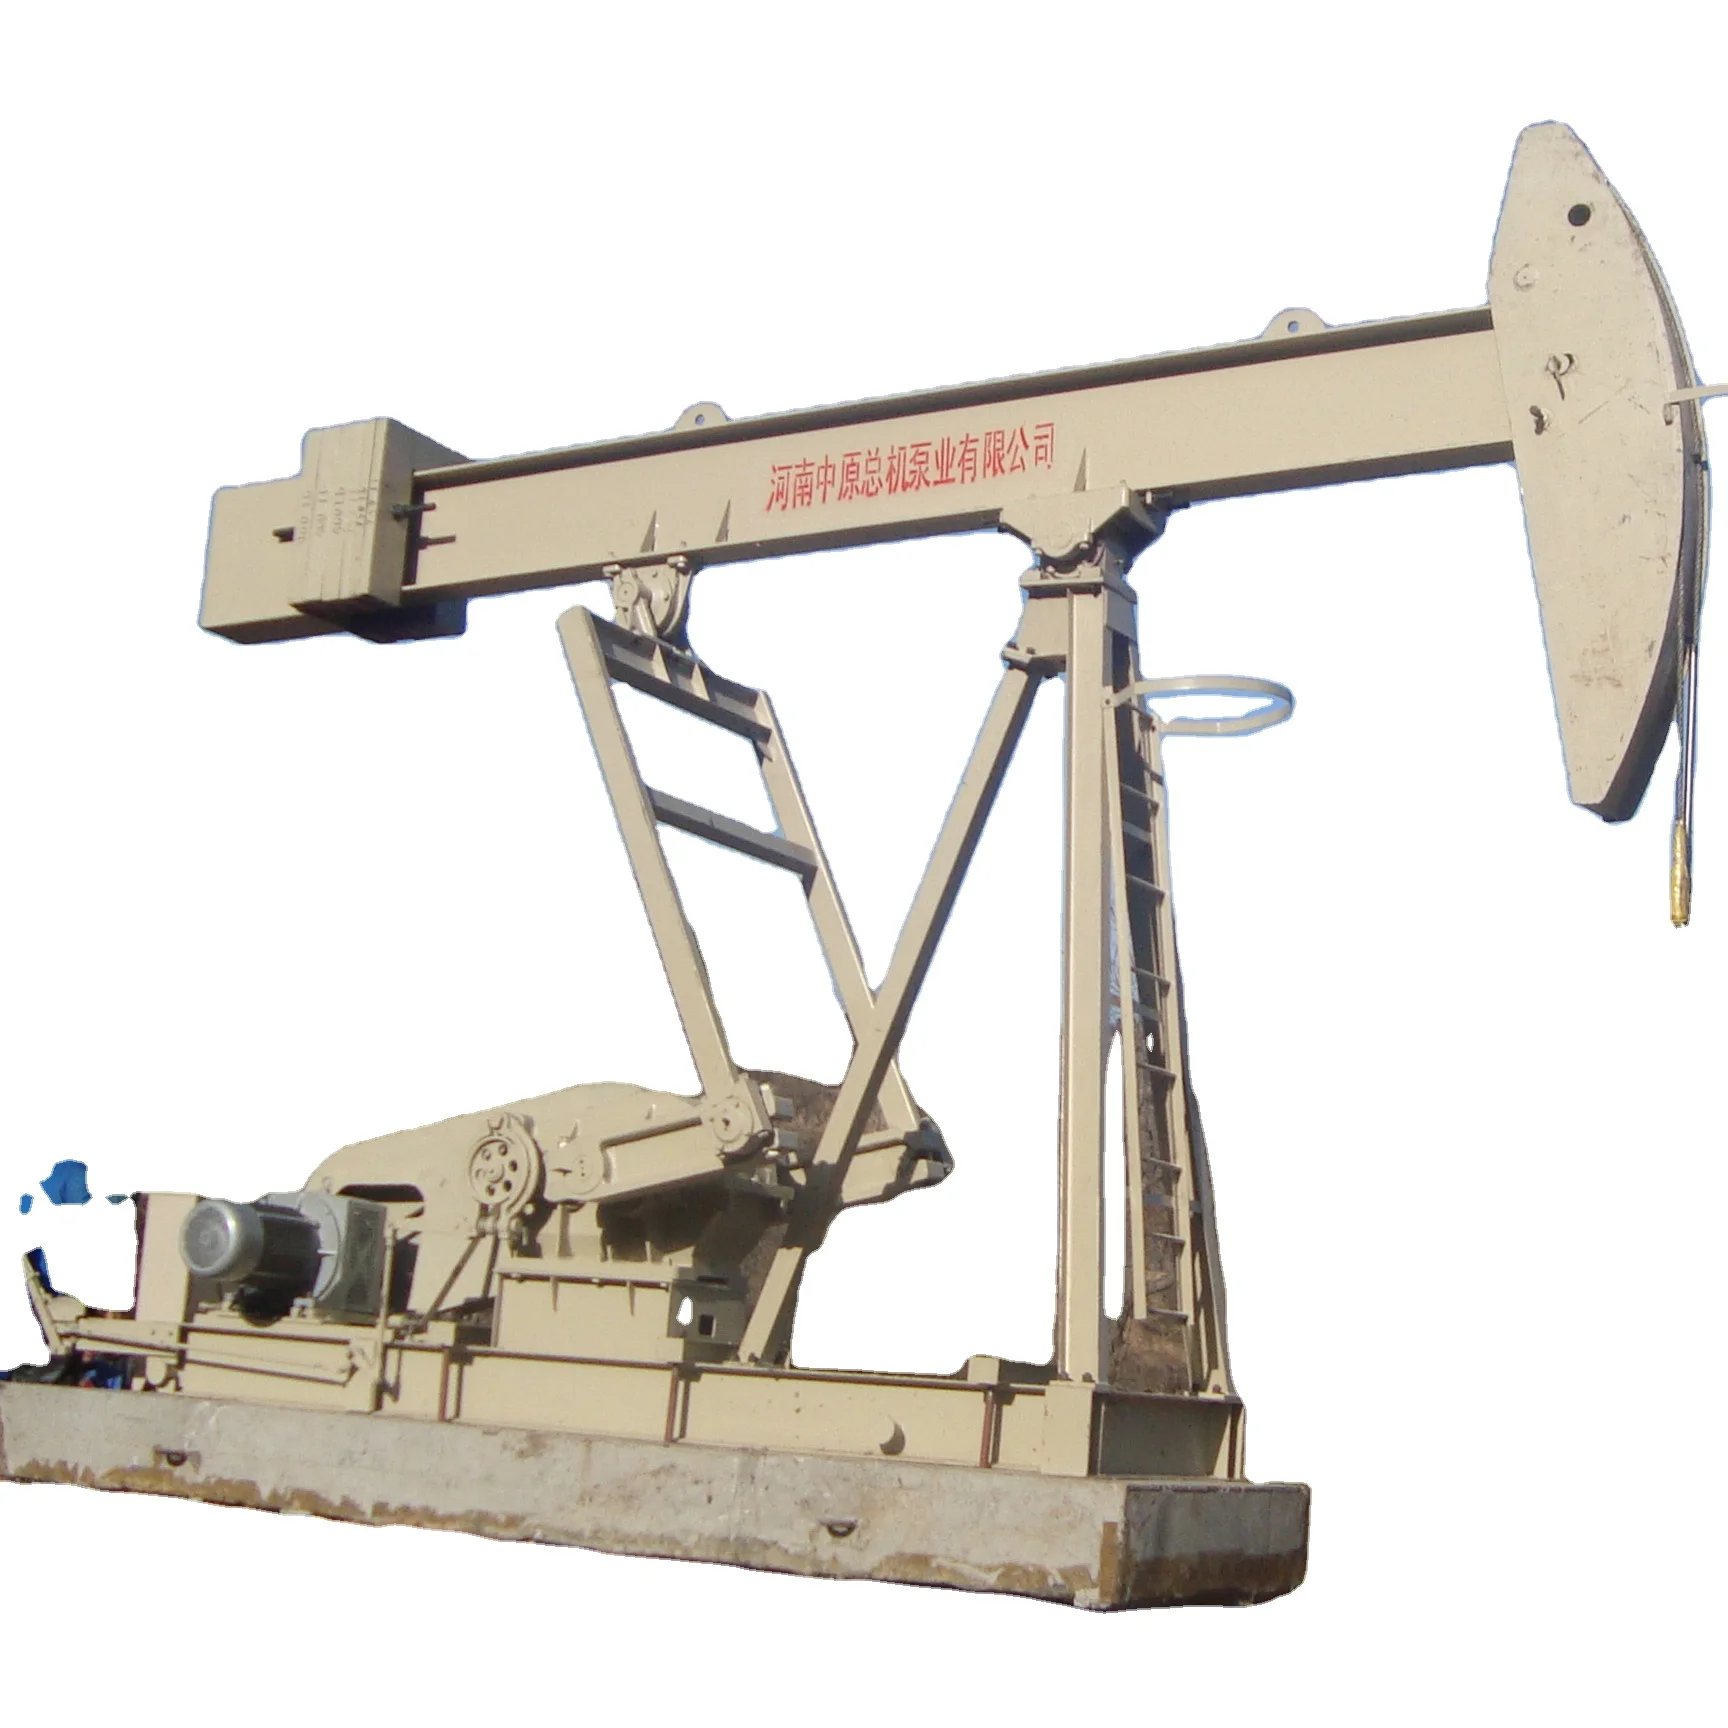 
API B series conventional beam pumping units for oil extraction 